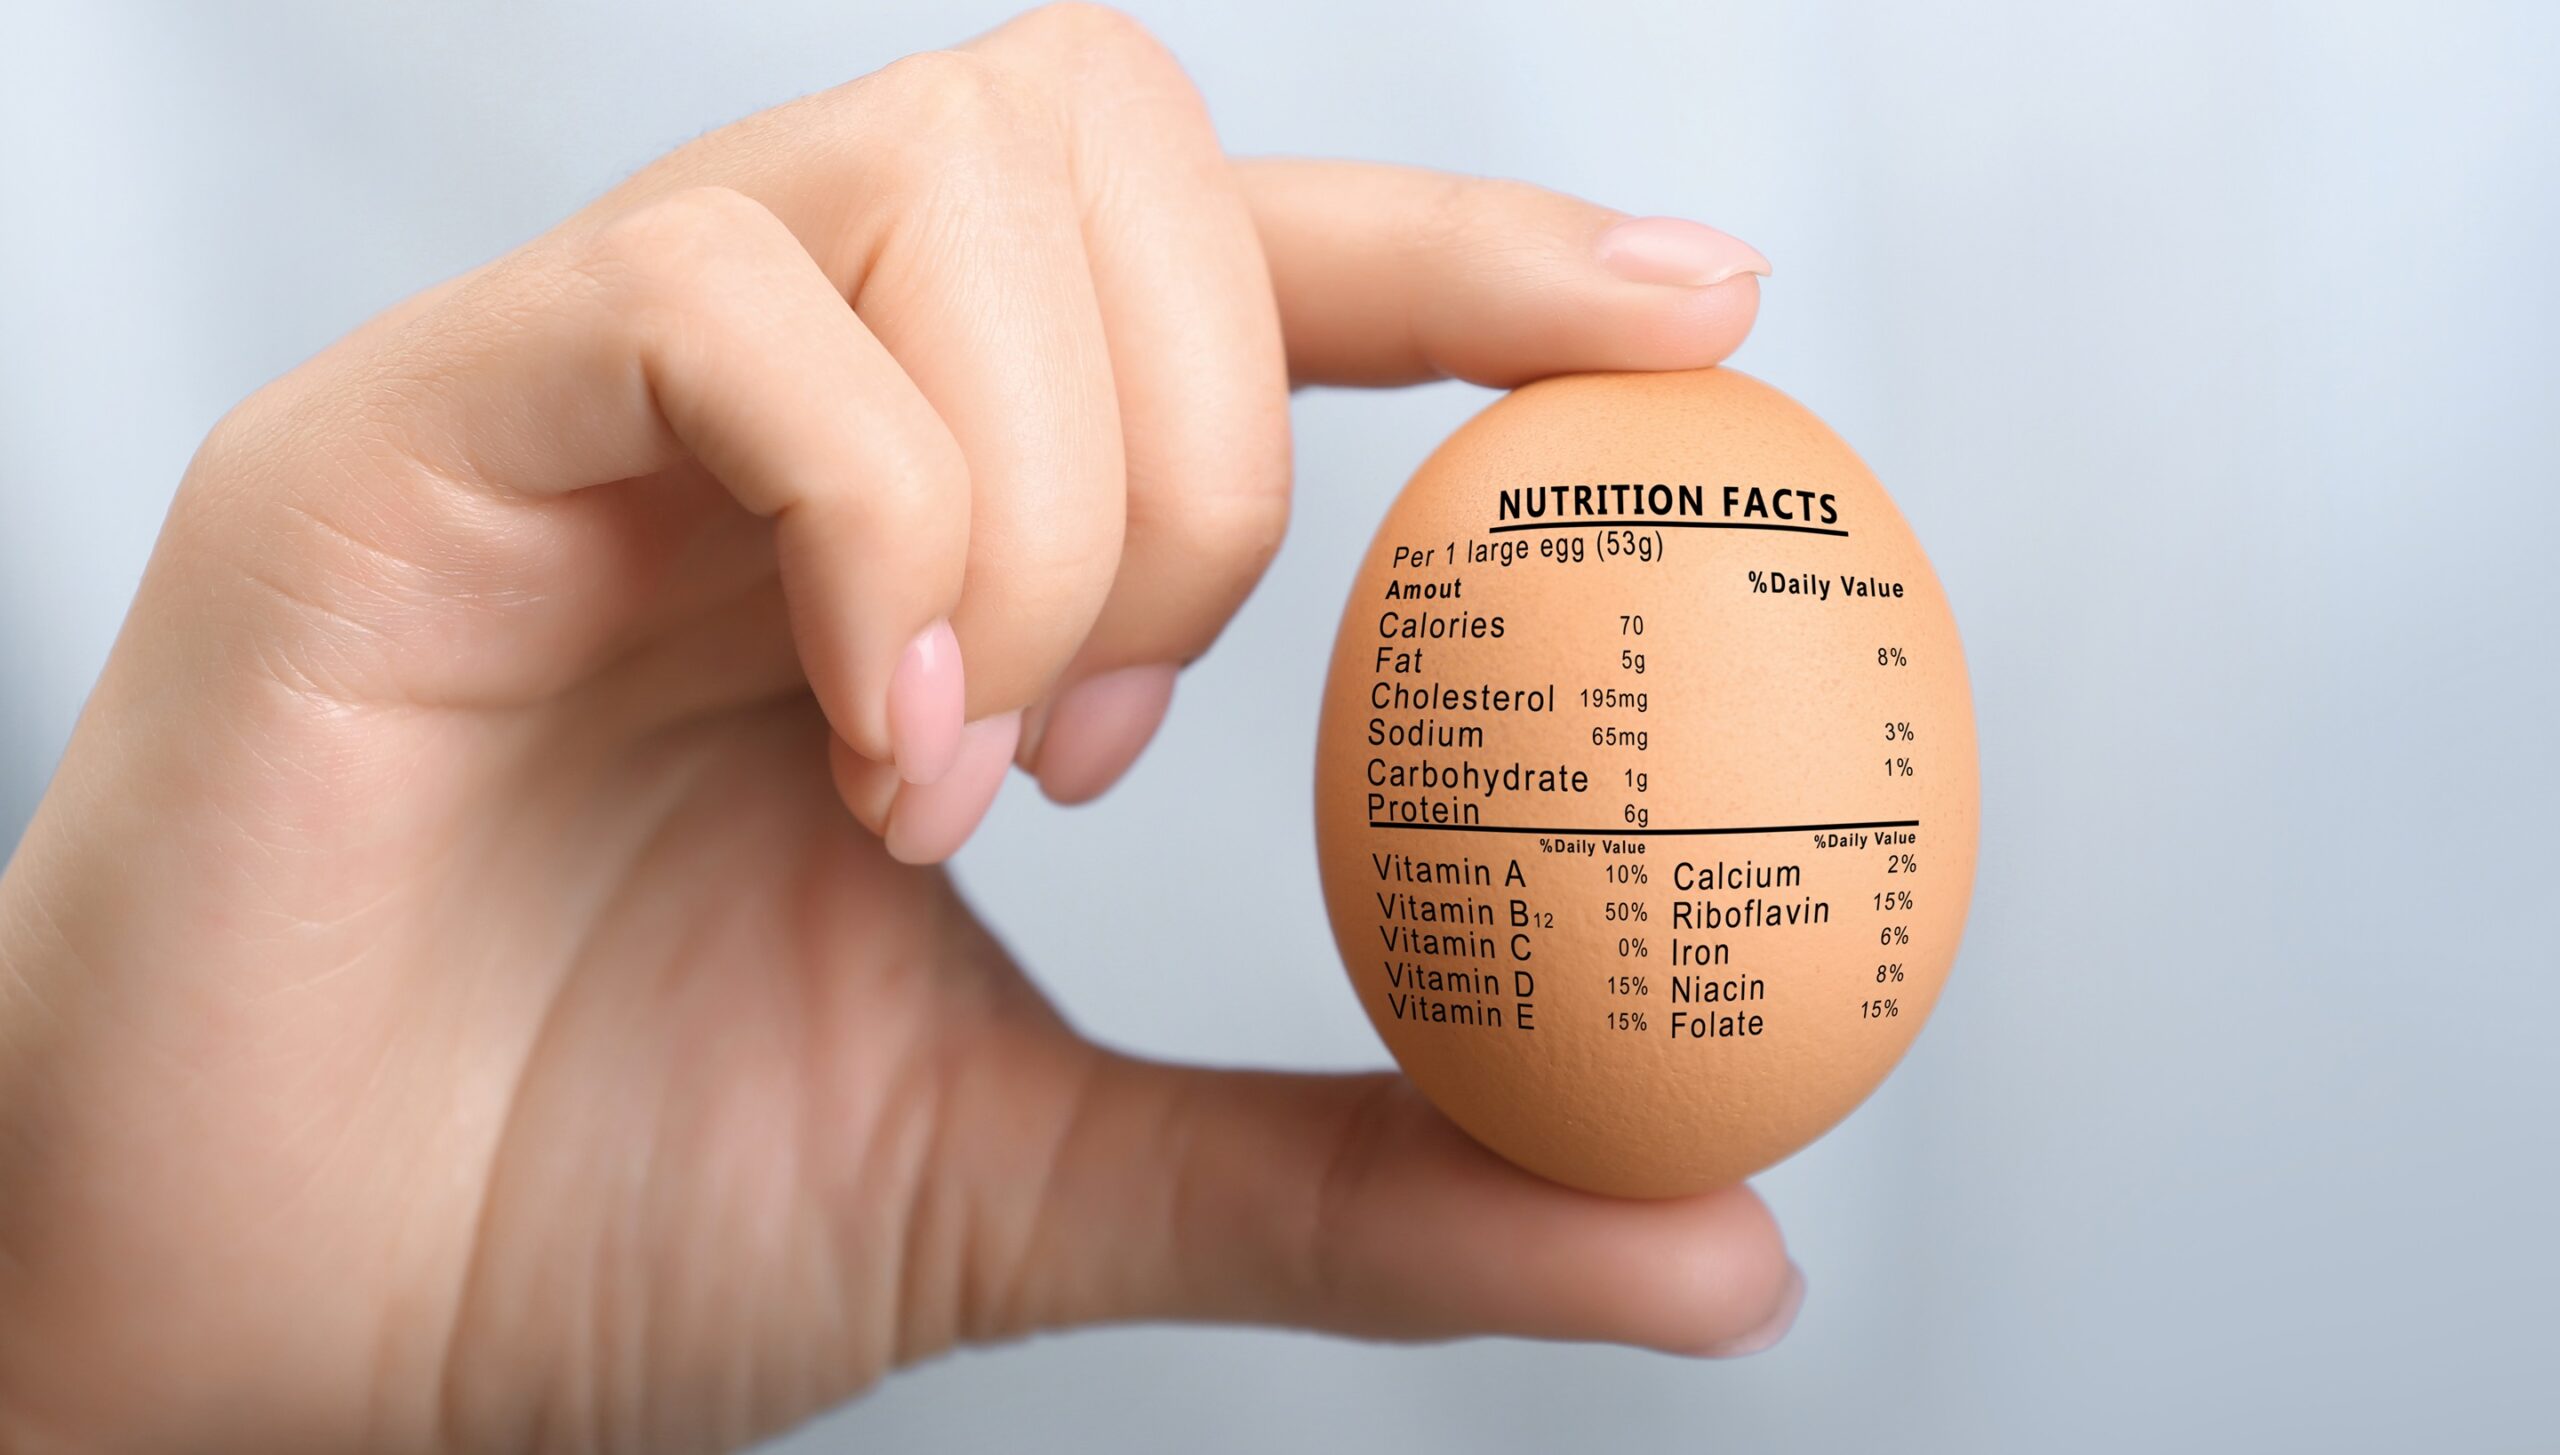 Just one egg a week?  Studies and experts debunk cholesterol myths